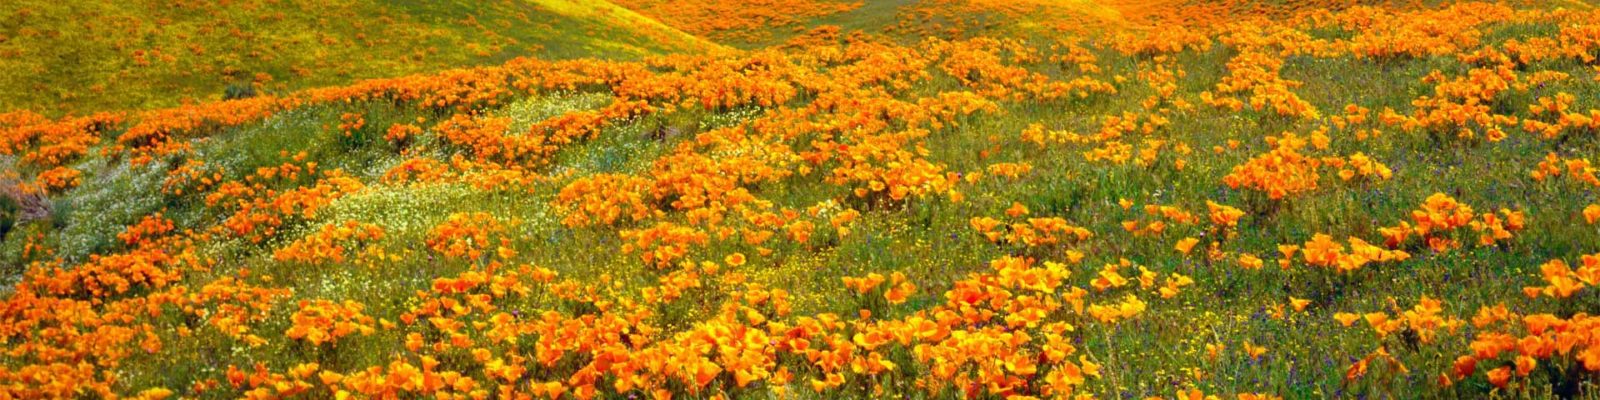 antelope valley bankruptcy poppies